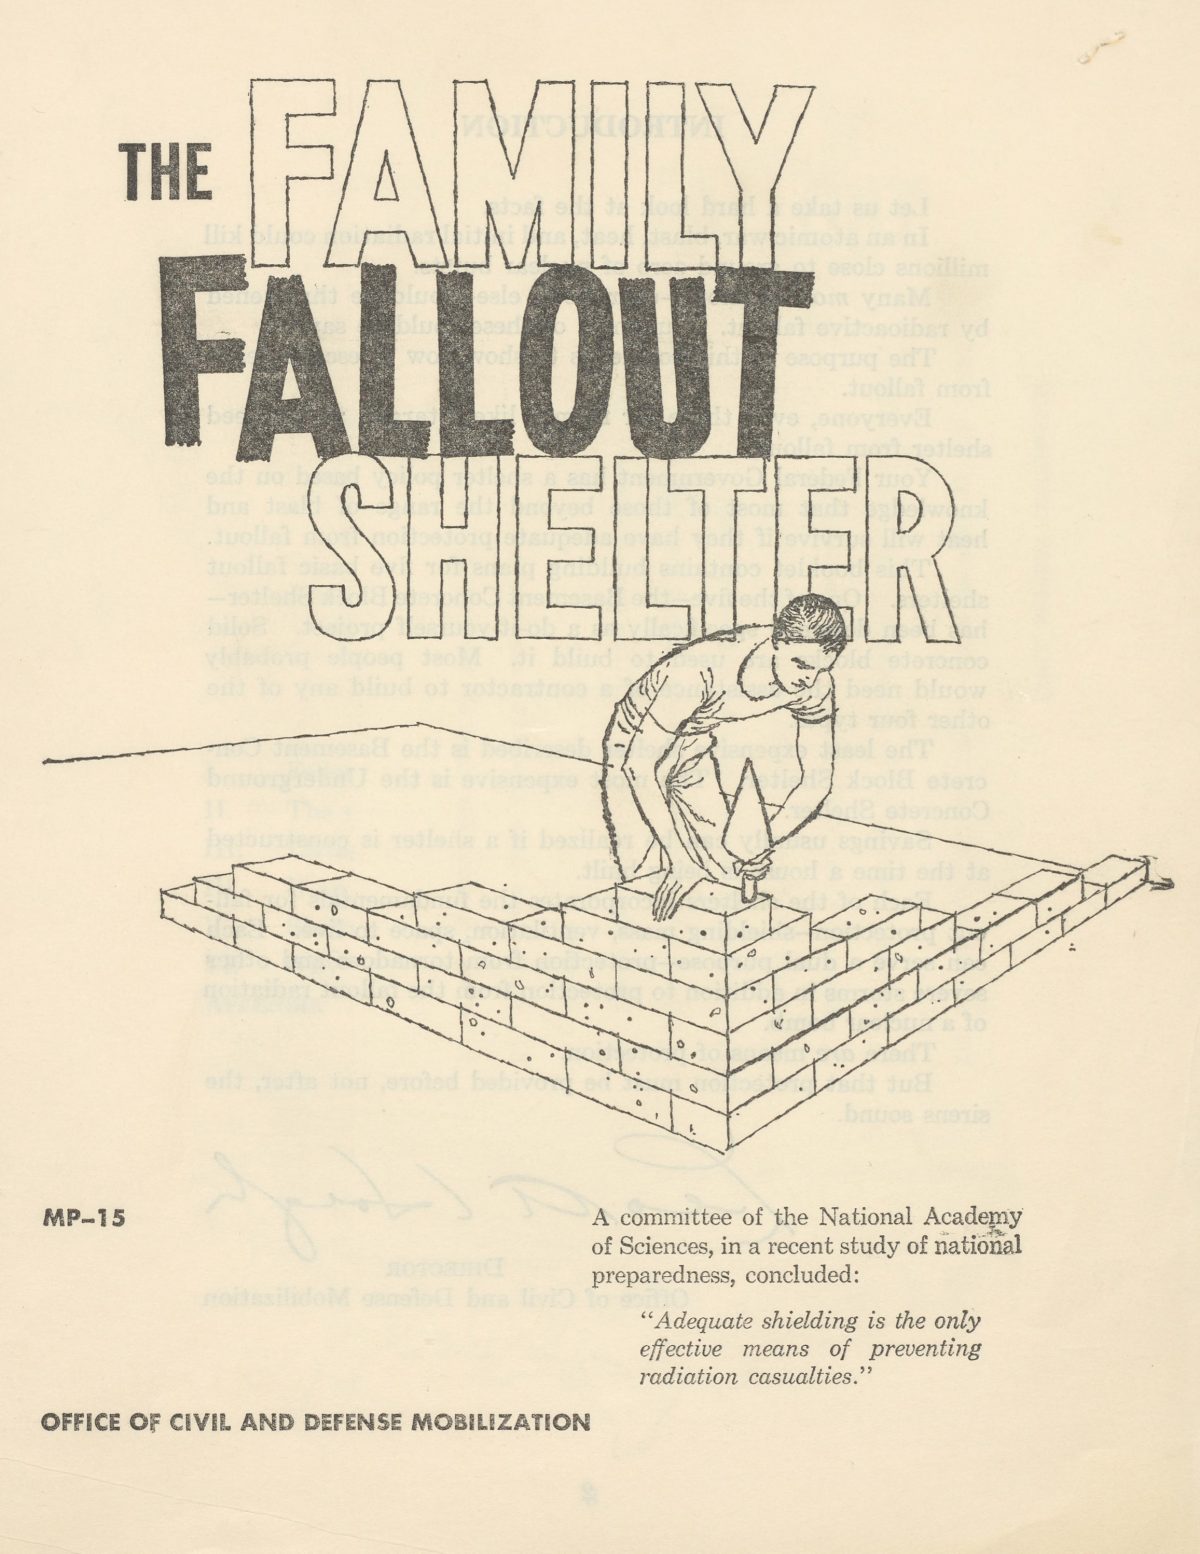 The Family Fallout Shelter 1959